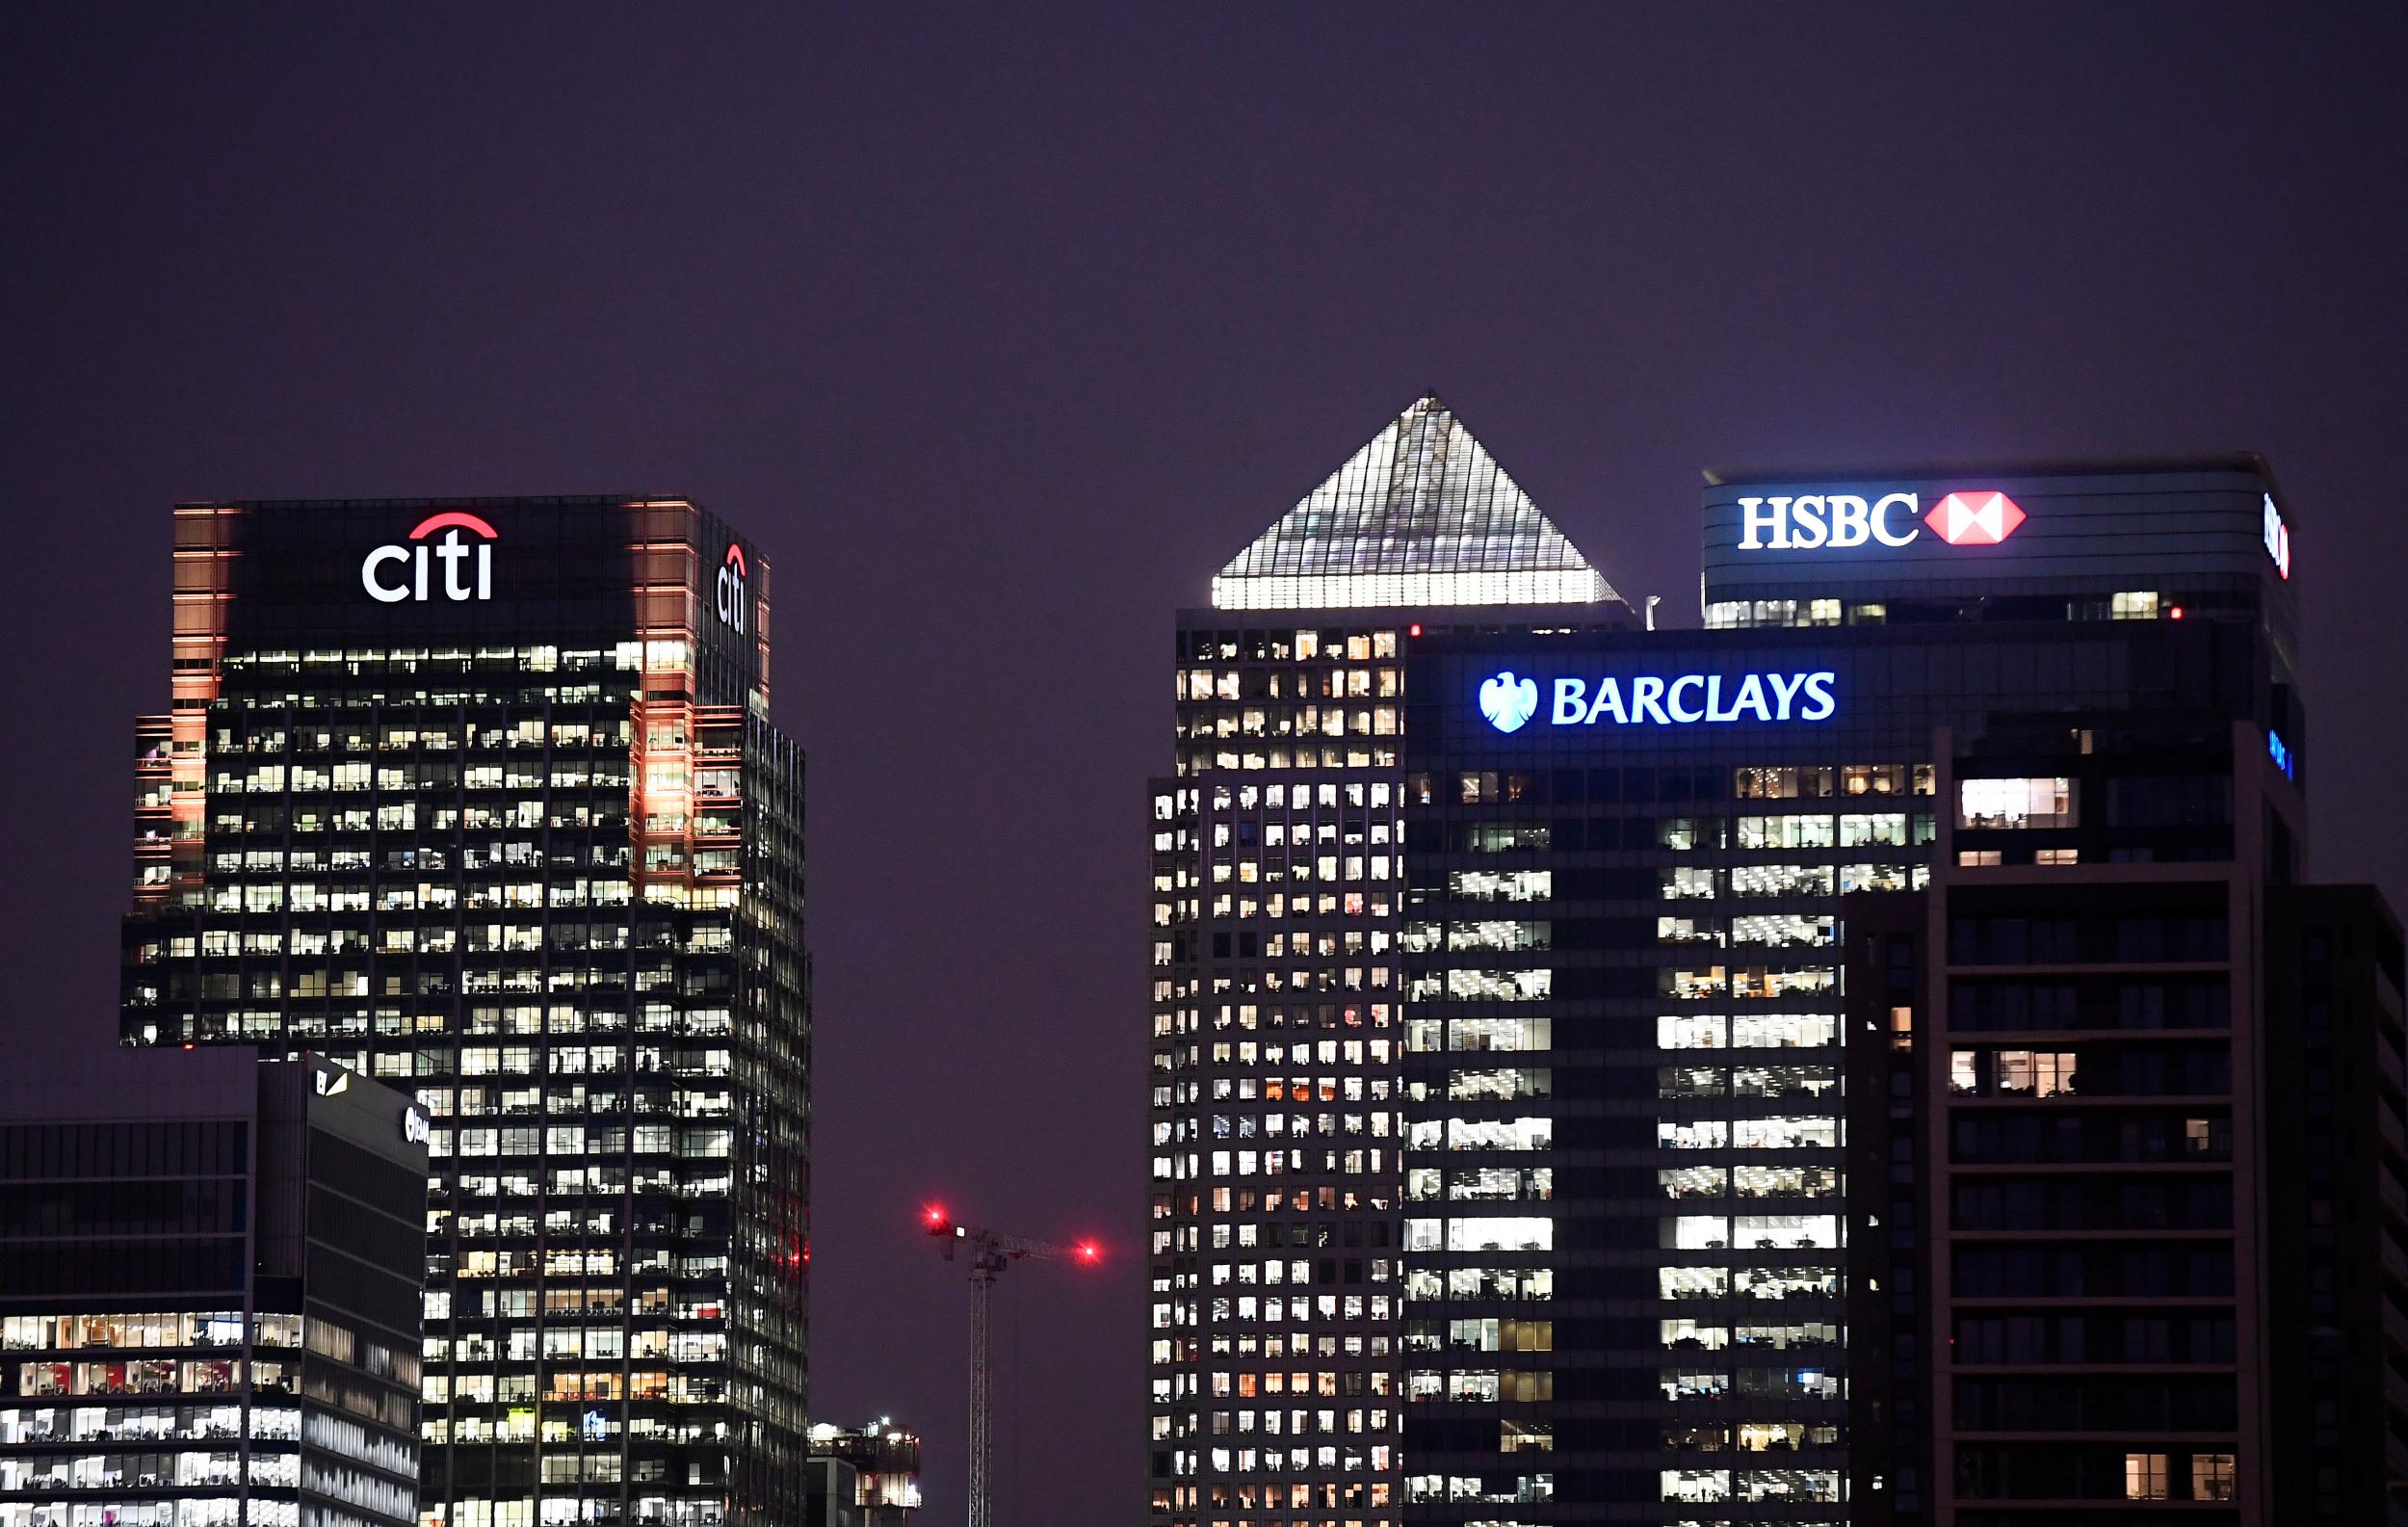 The City would be excited at the prospect of a deal involving Barclays, but others are more likely to take the plunge